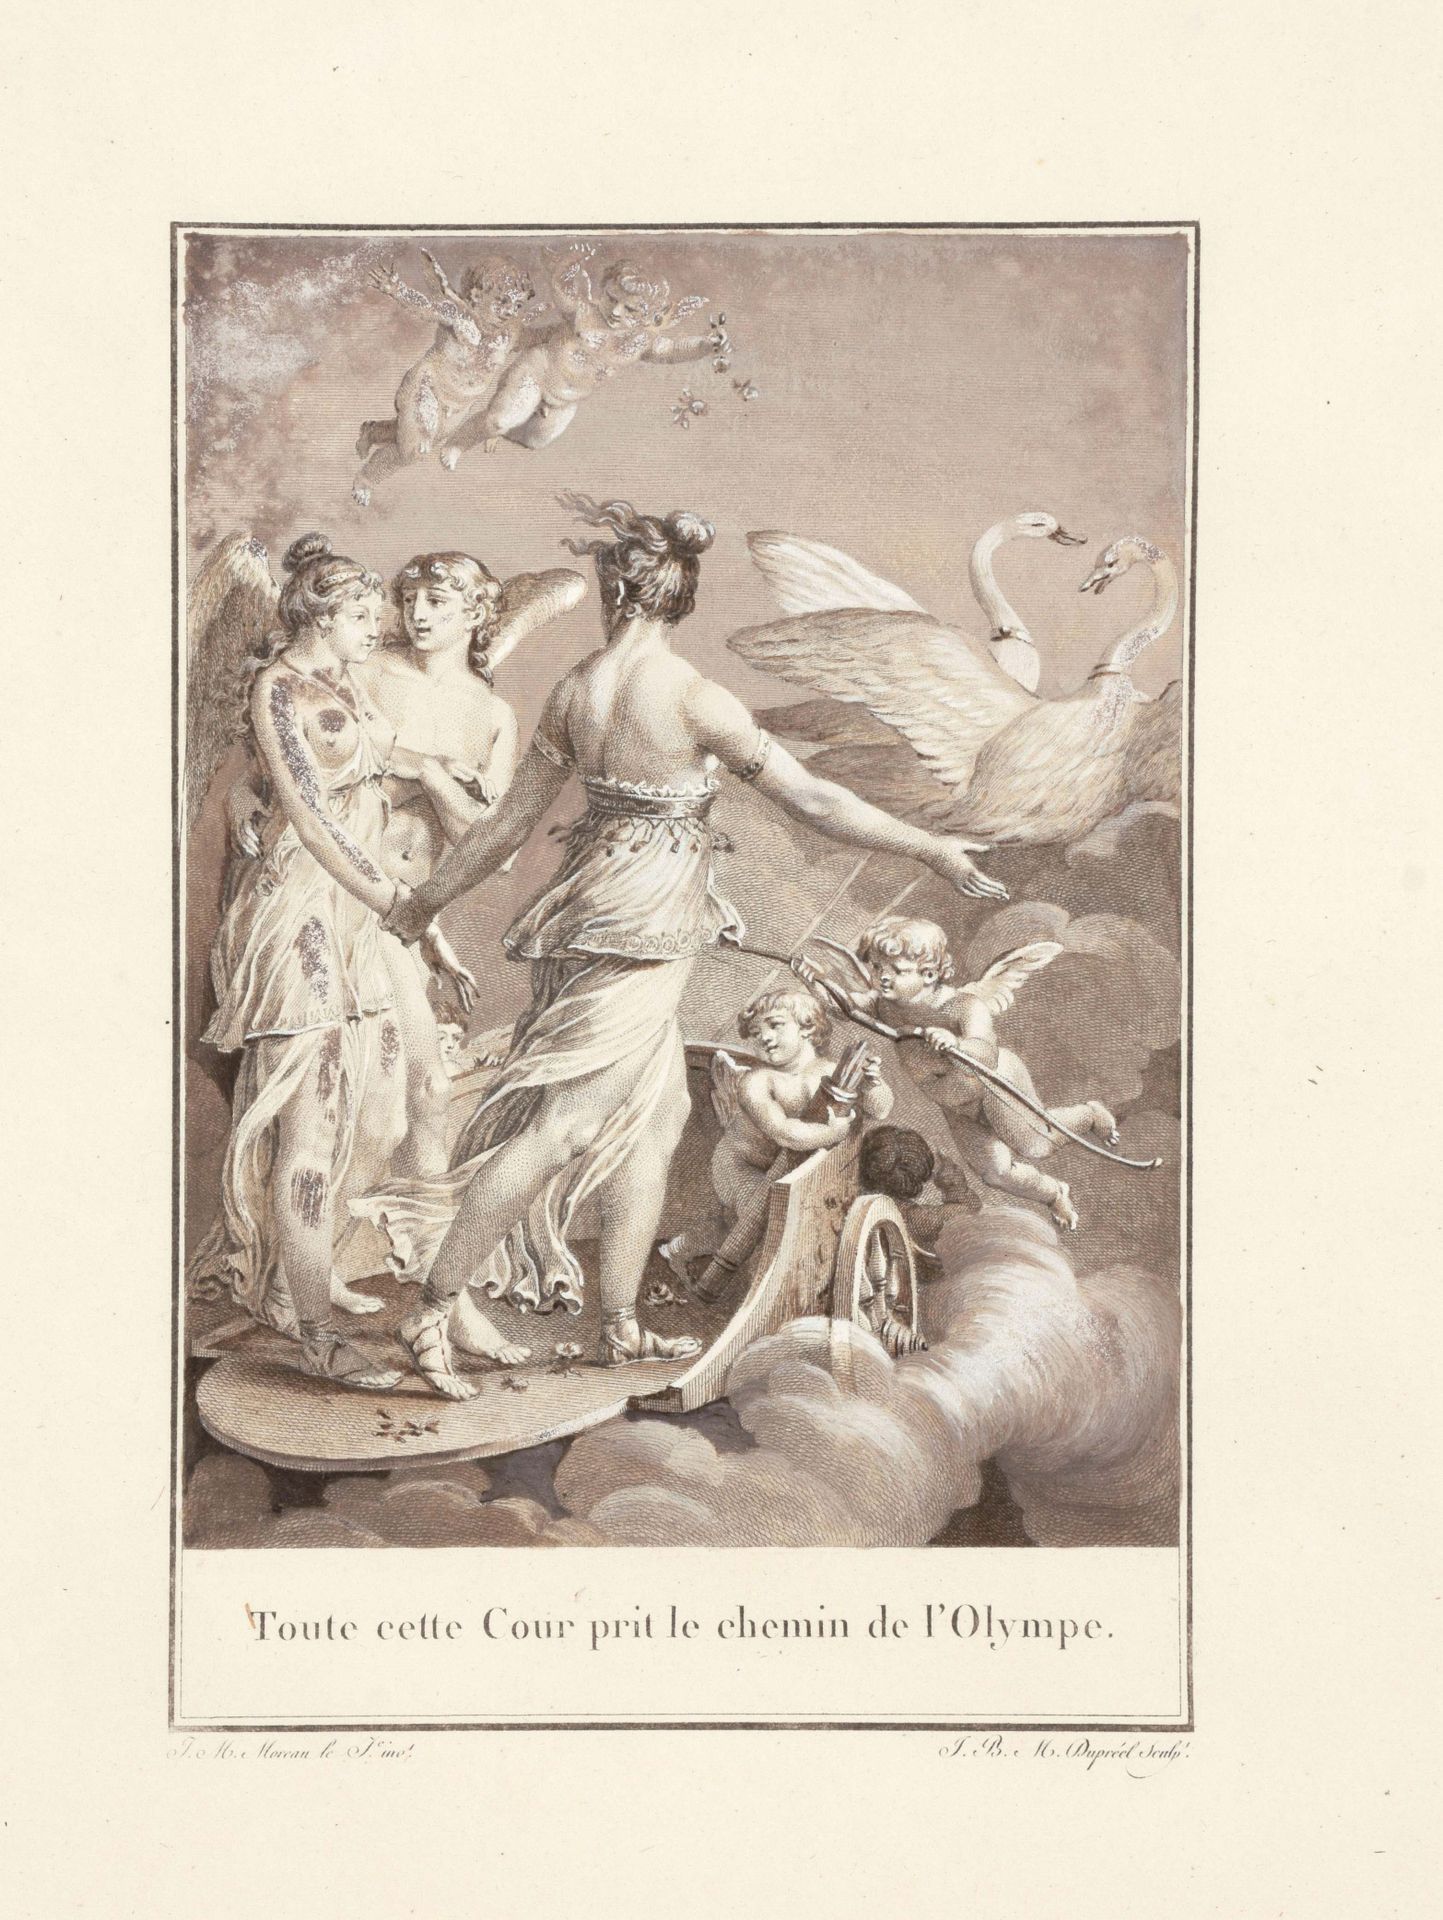 LA FONTAINE, Jean de The loves of Psyche and Cupid, followed by Adonis, poem

Gr&hellip;